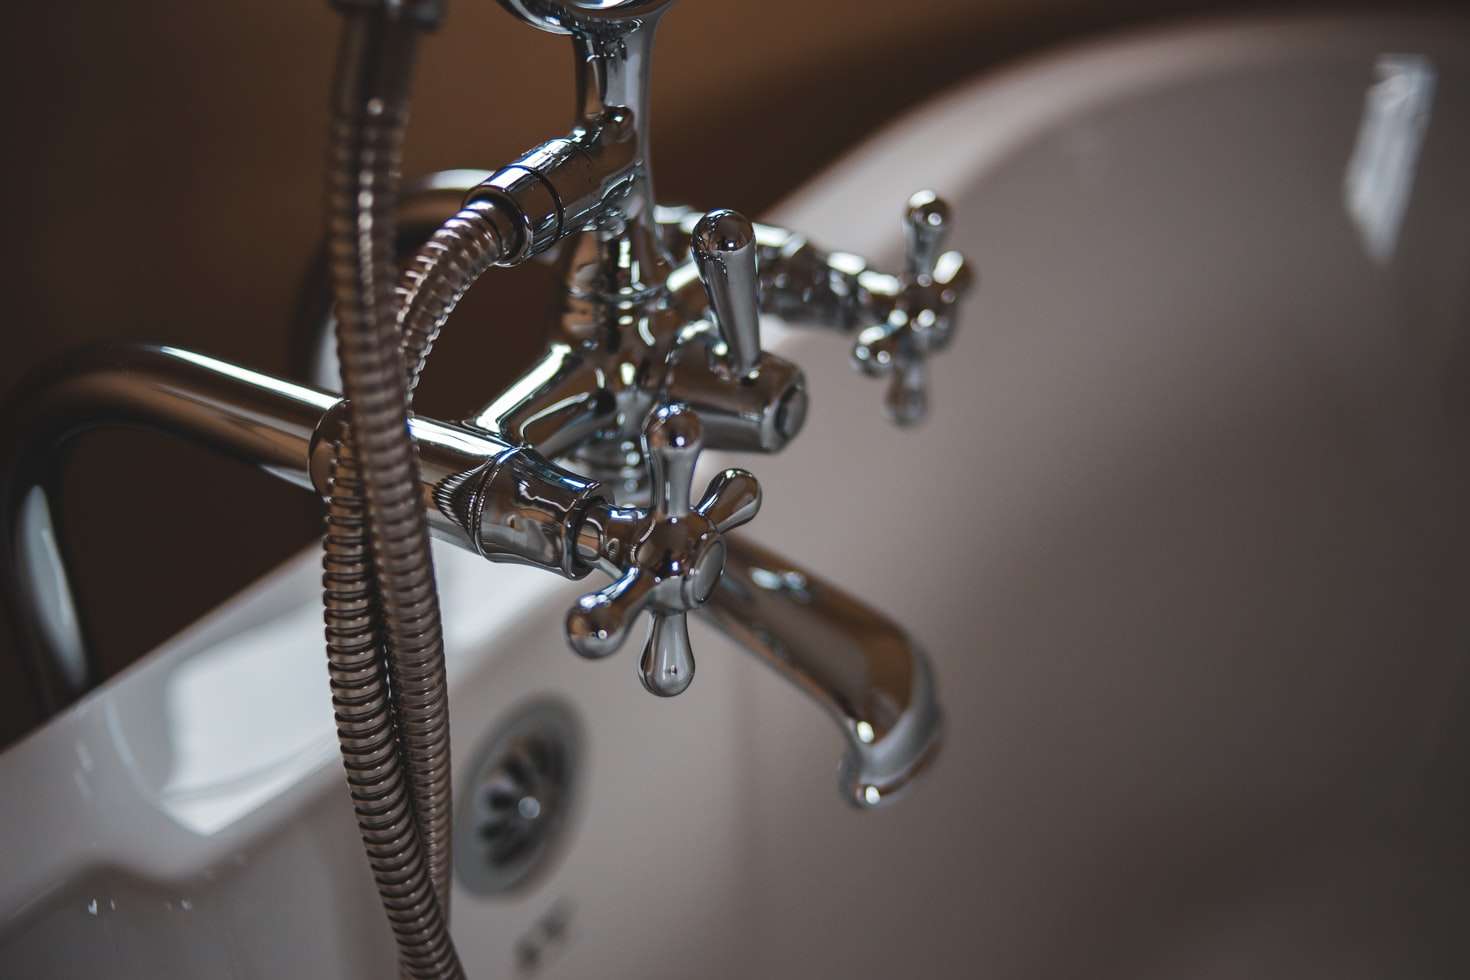 No Hot Water in Your Shower? Plumbing Services in Los Angeles California Can Help